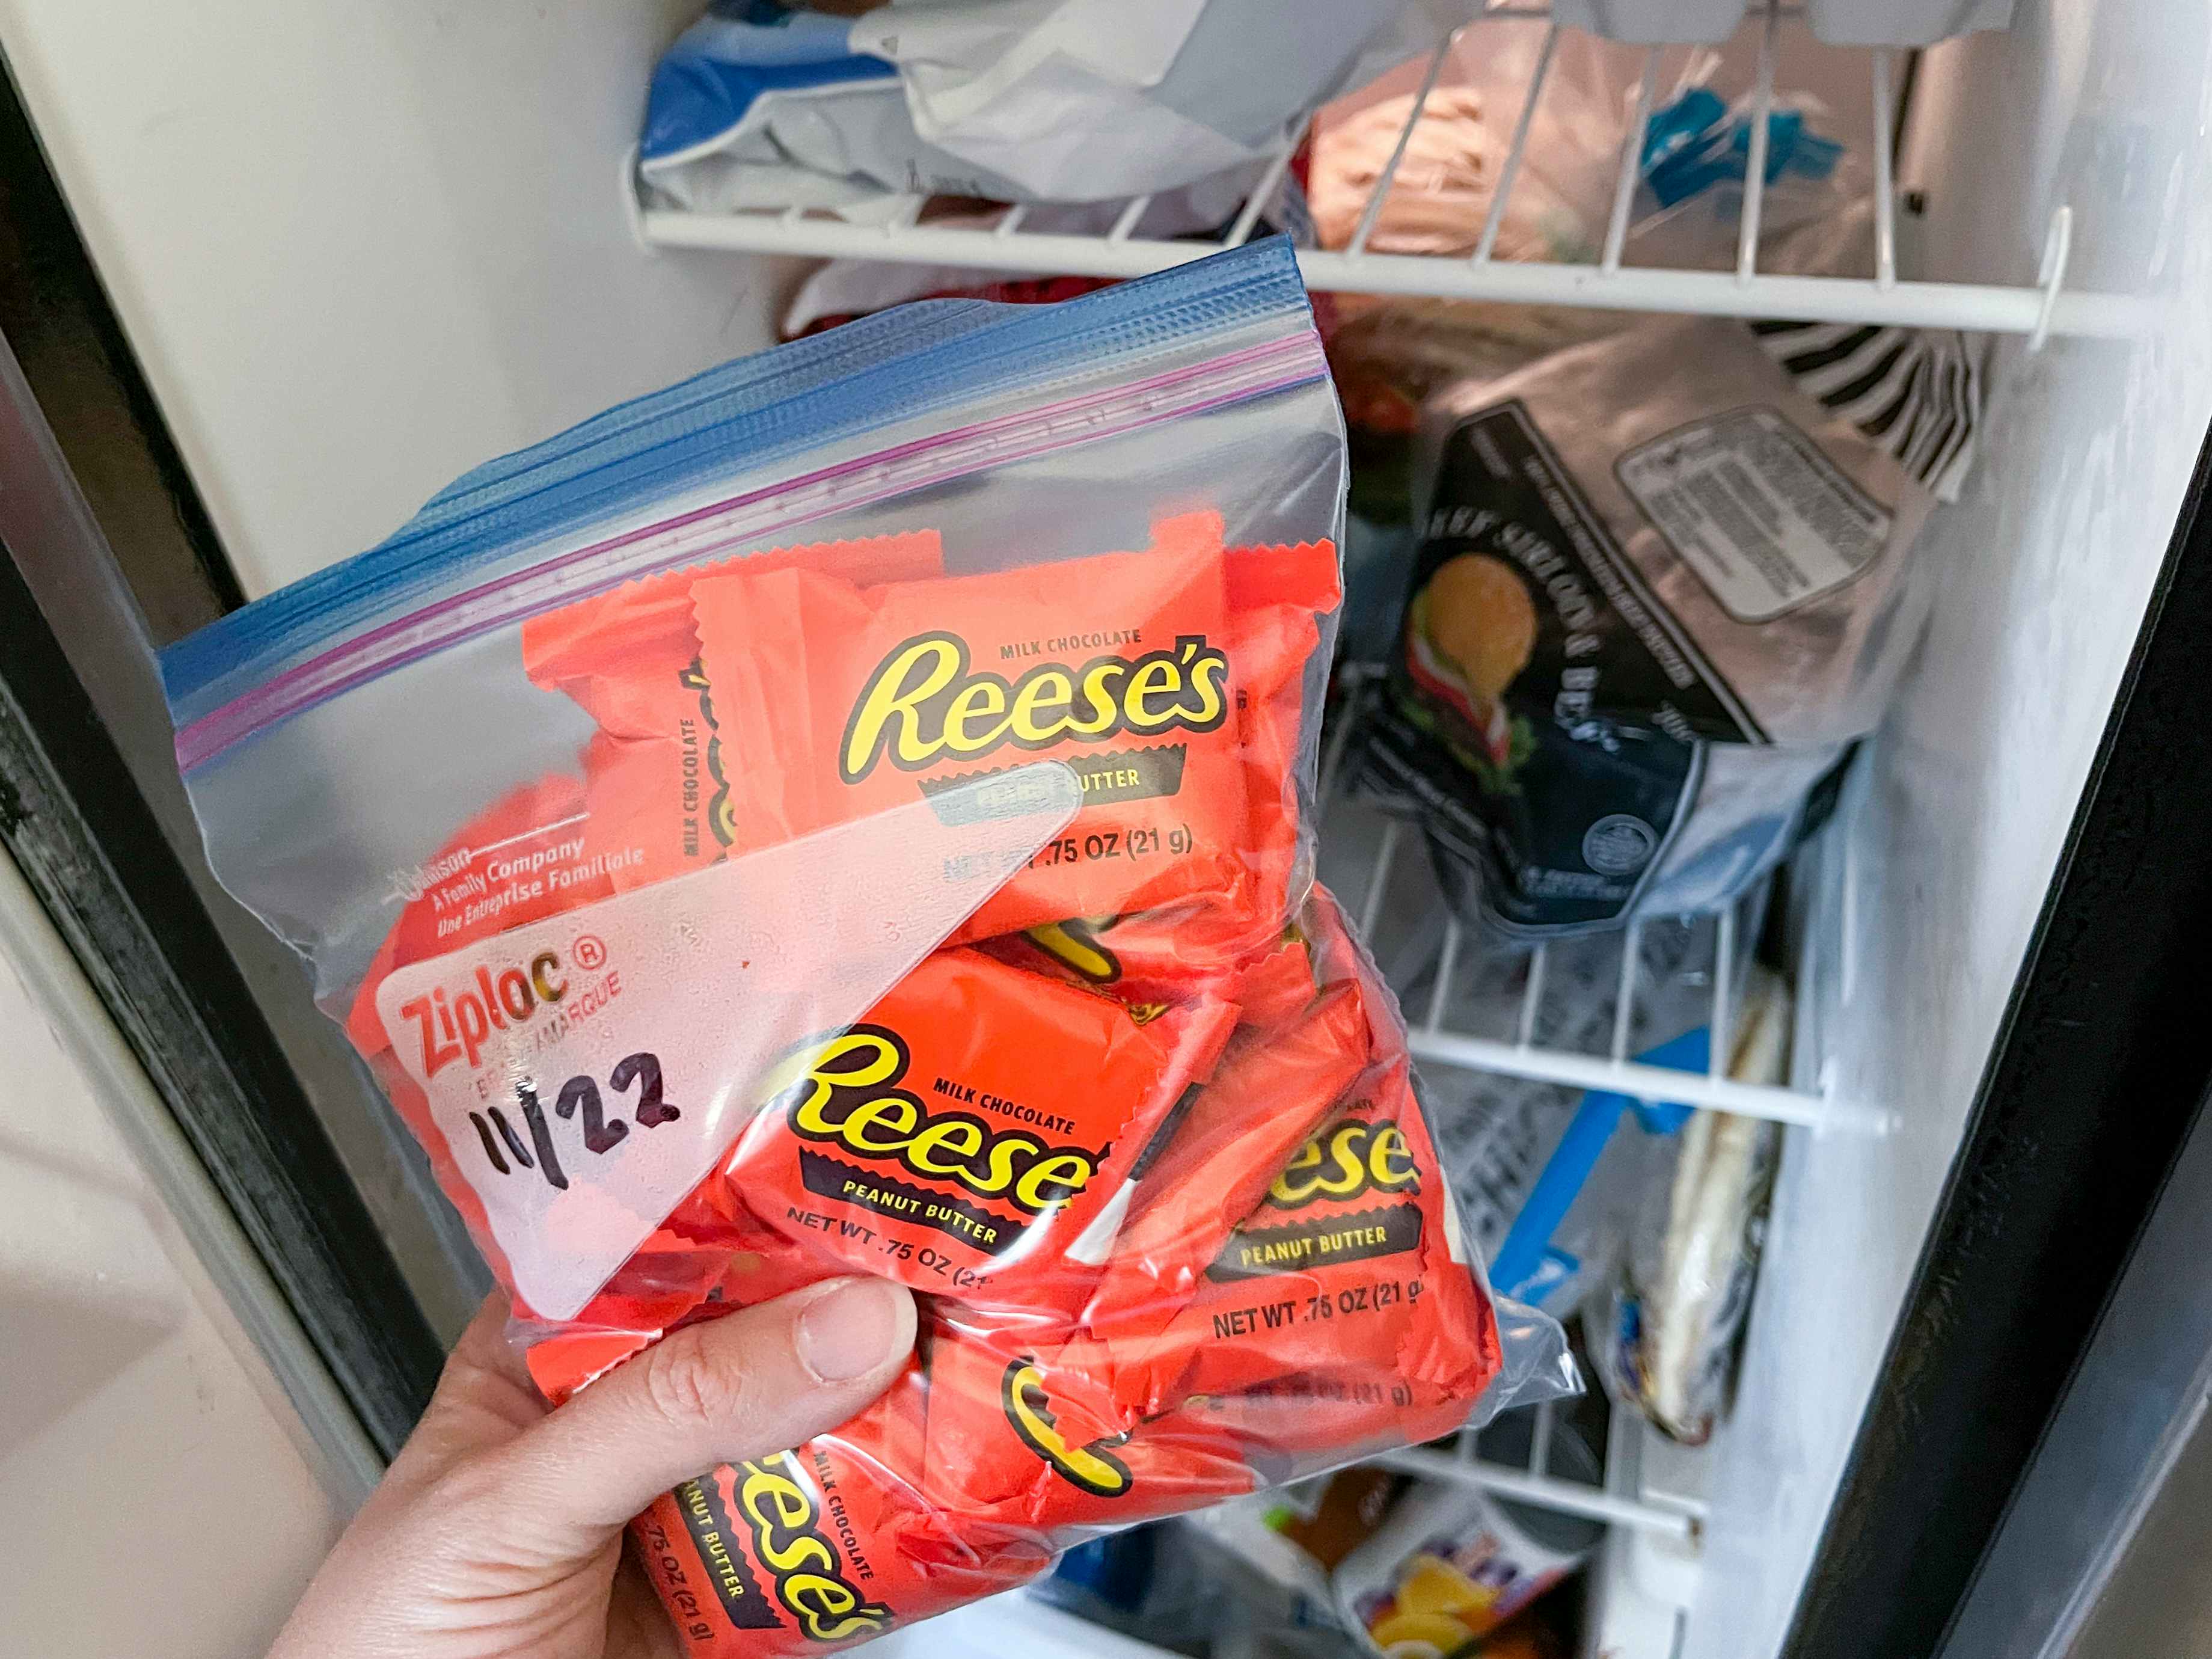 A person putting a Ziploc bag of leftover Halloween candy into their freezer.